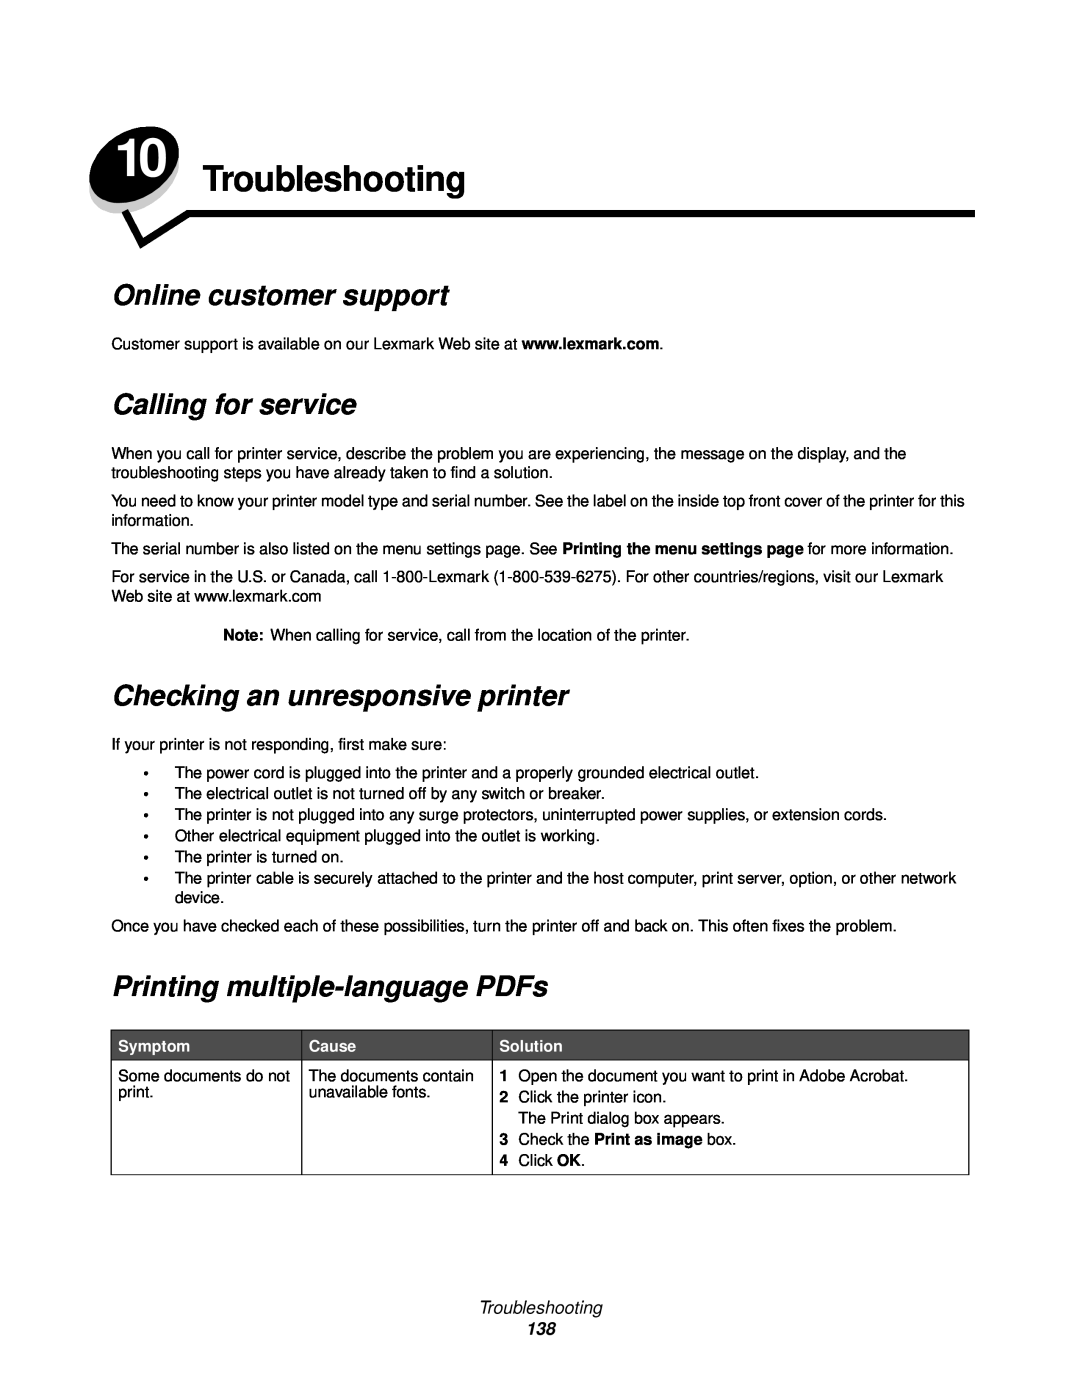 Lexmark 920 manual Troubleshooting, Online customer support, Calling for service, Checking an unresponsive printer 